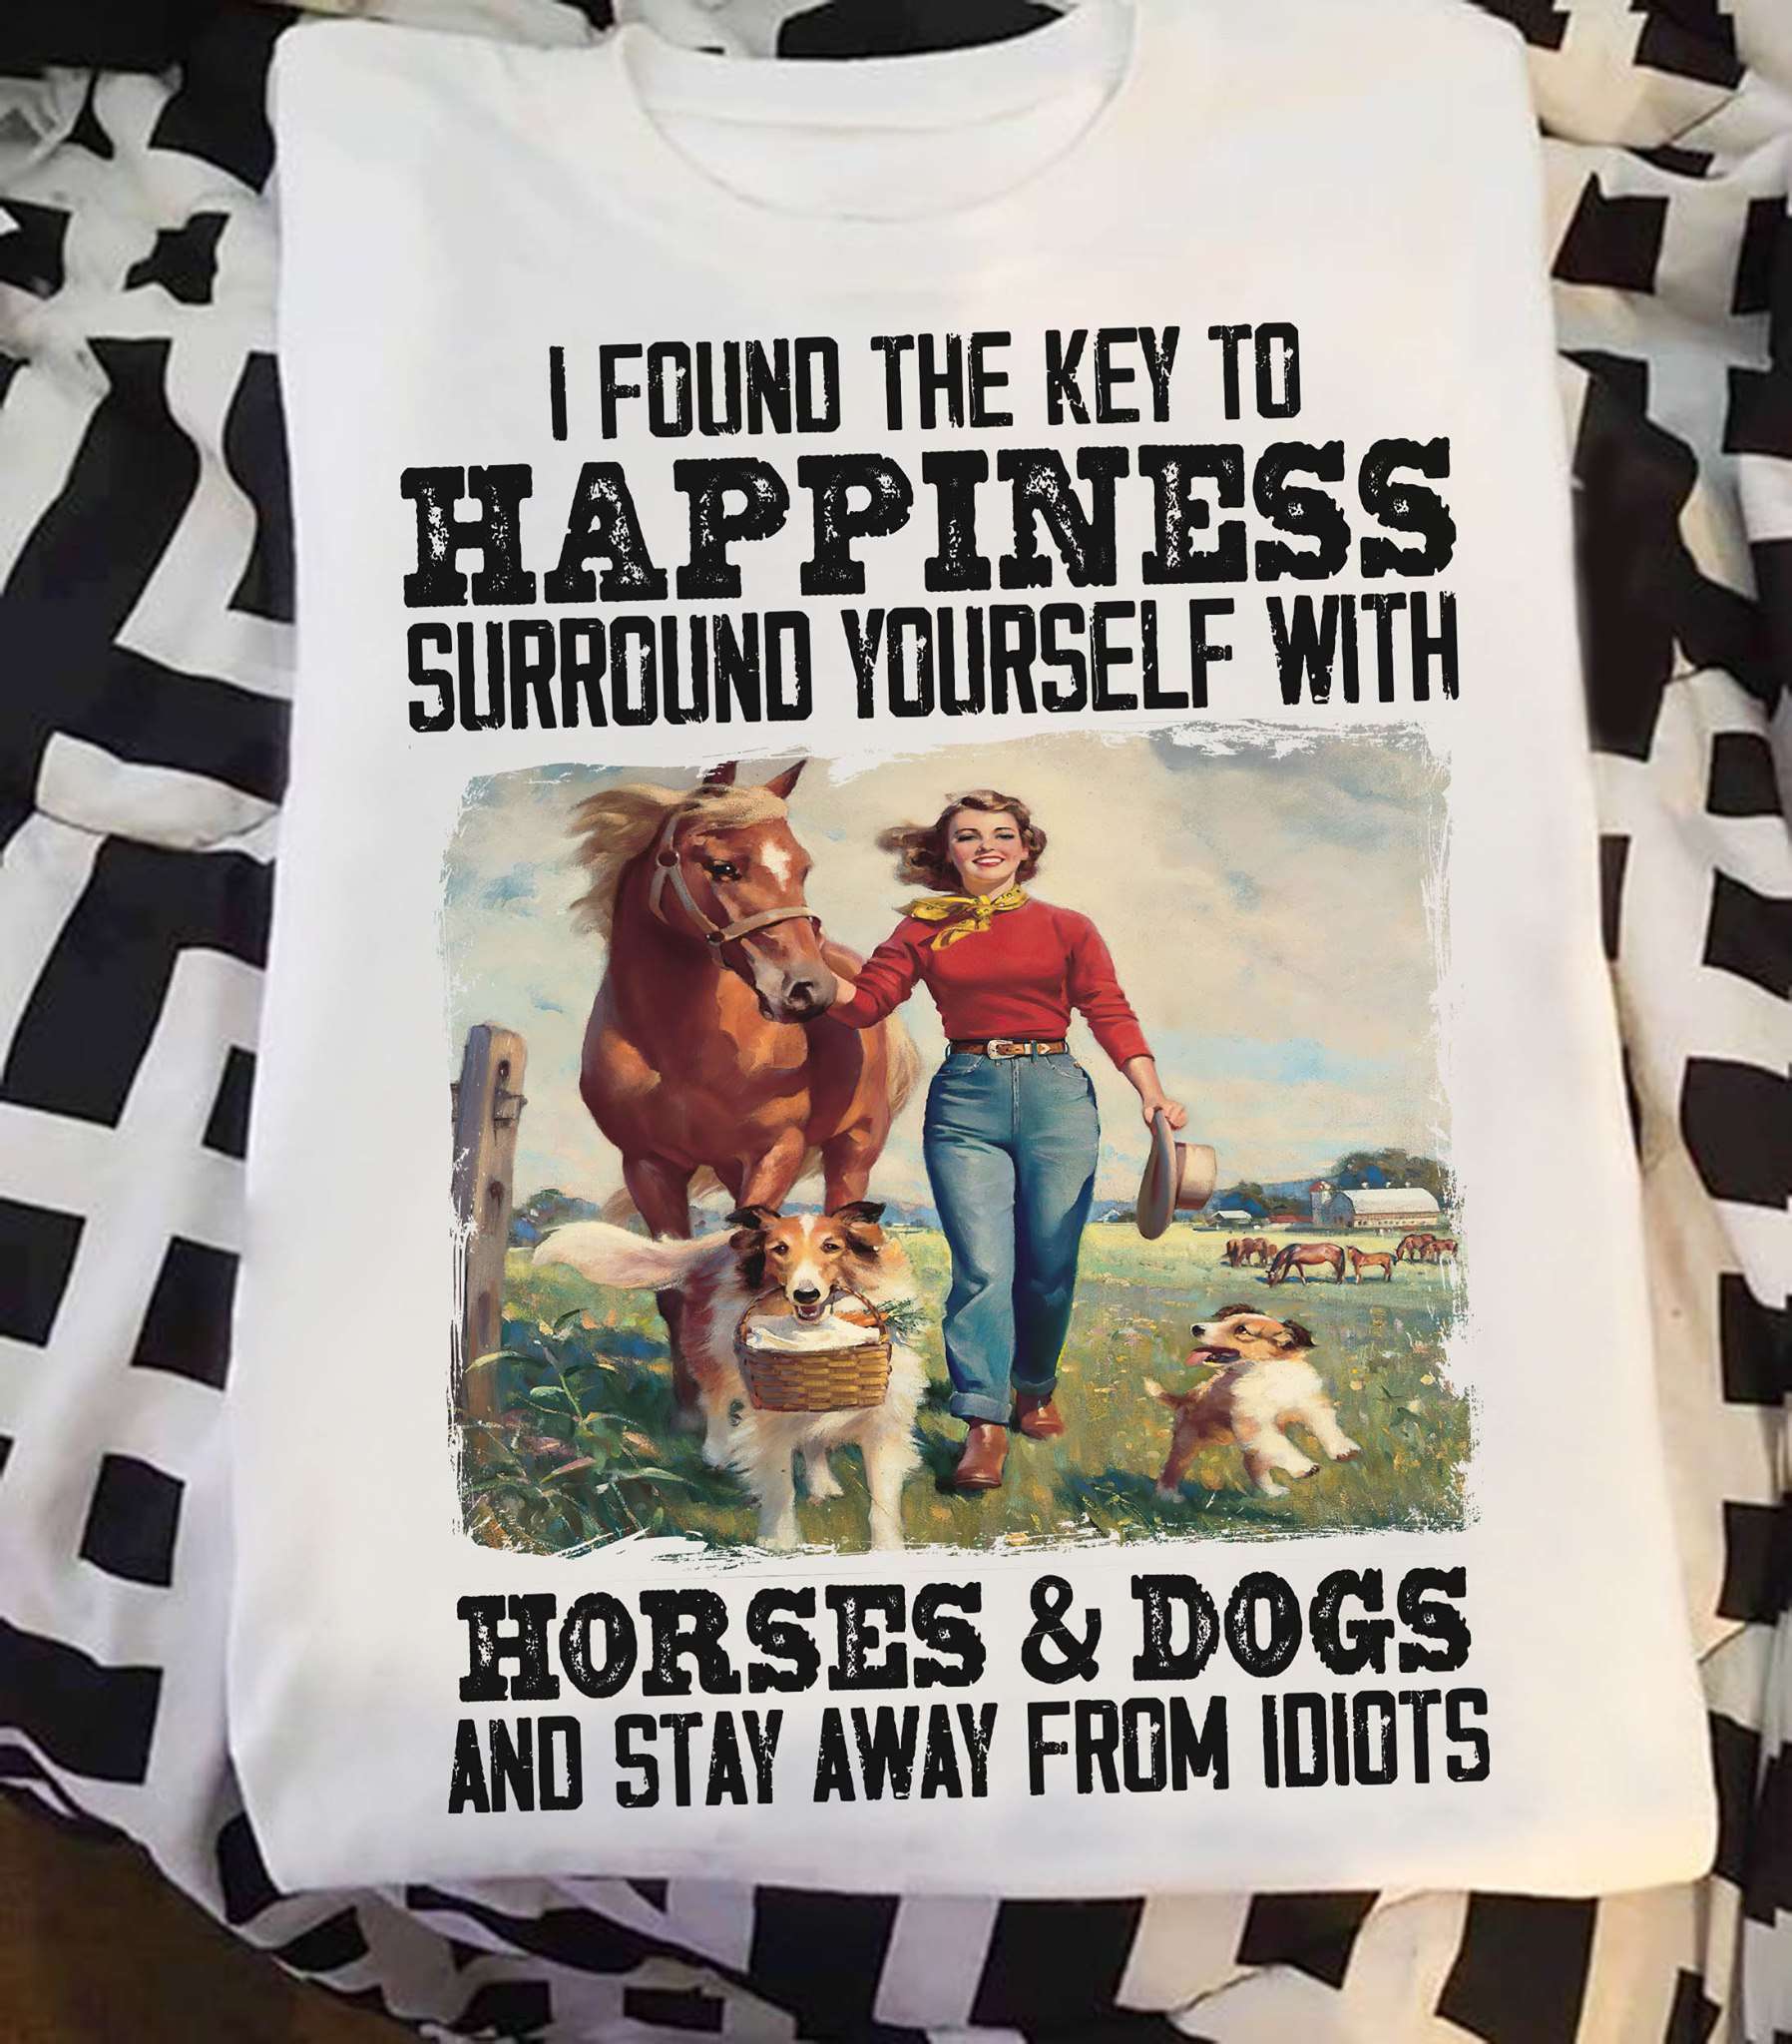 I found the key to happiness surround yourself with horses and dogs and stay away from idiots - Australian shepherd dog